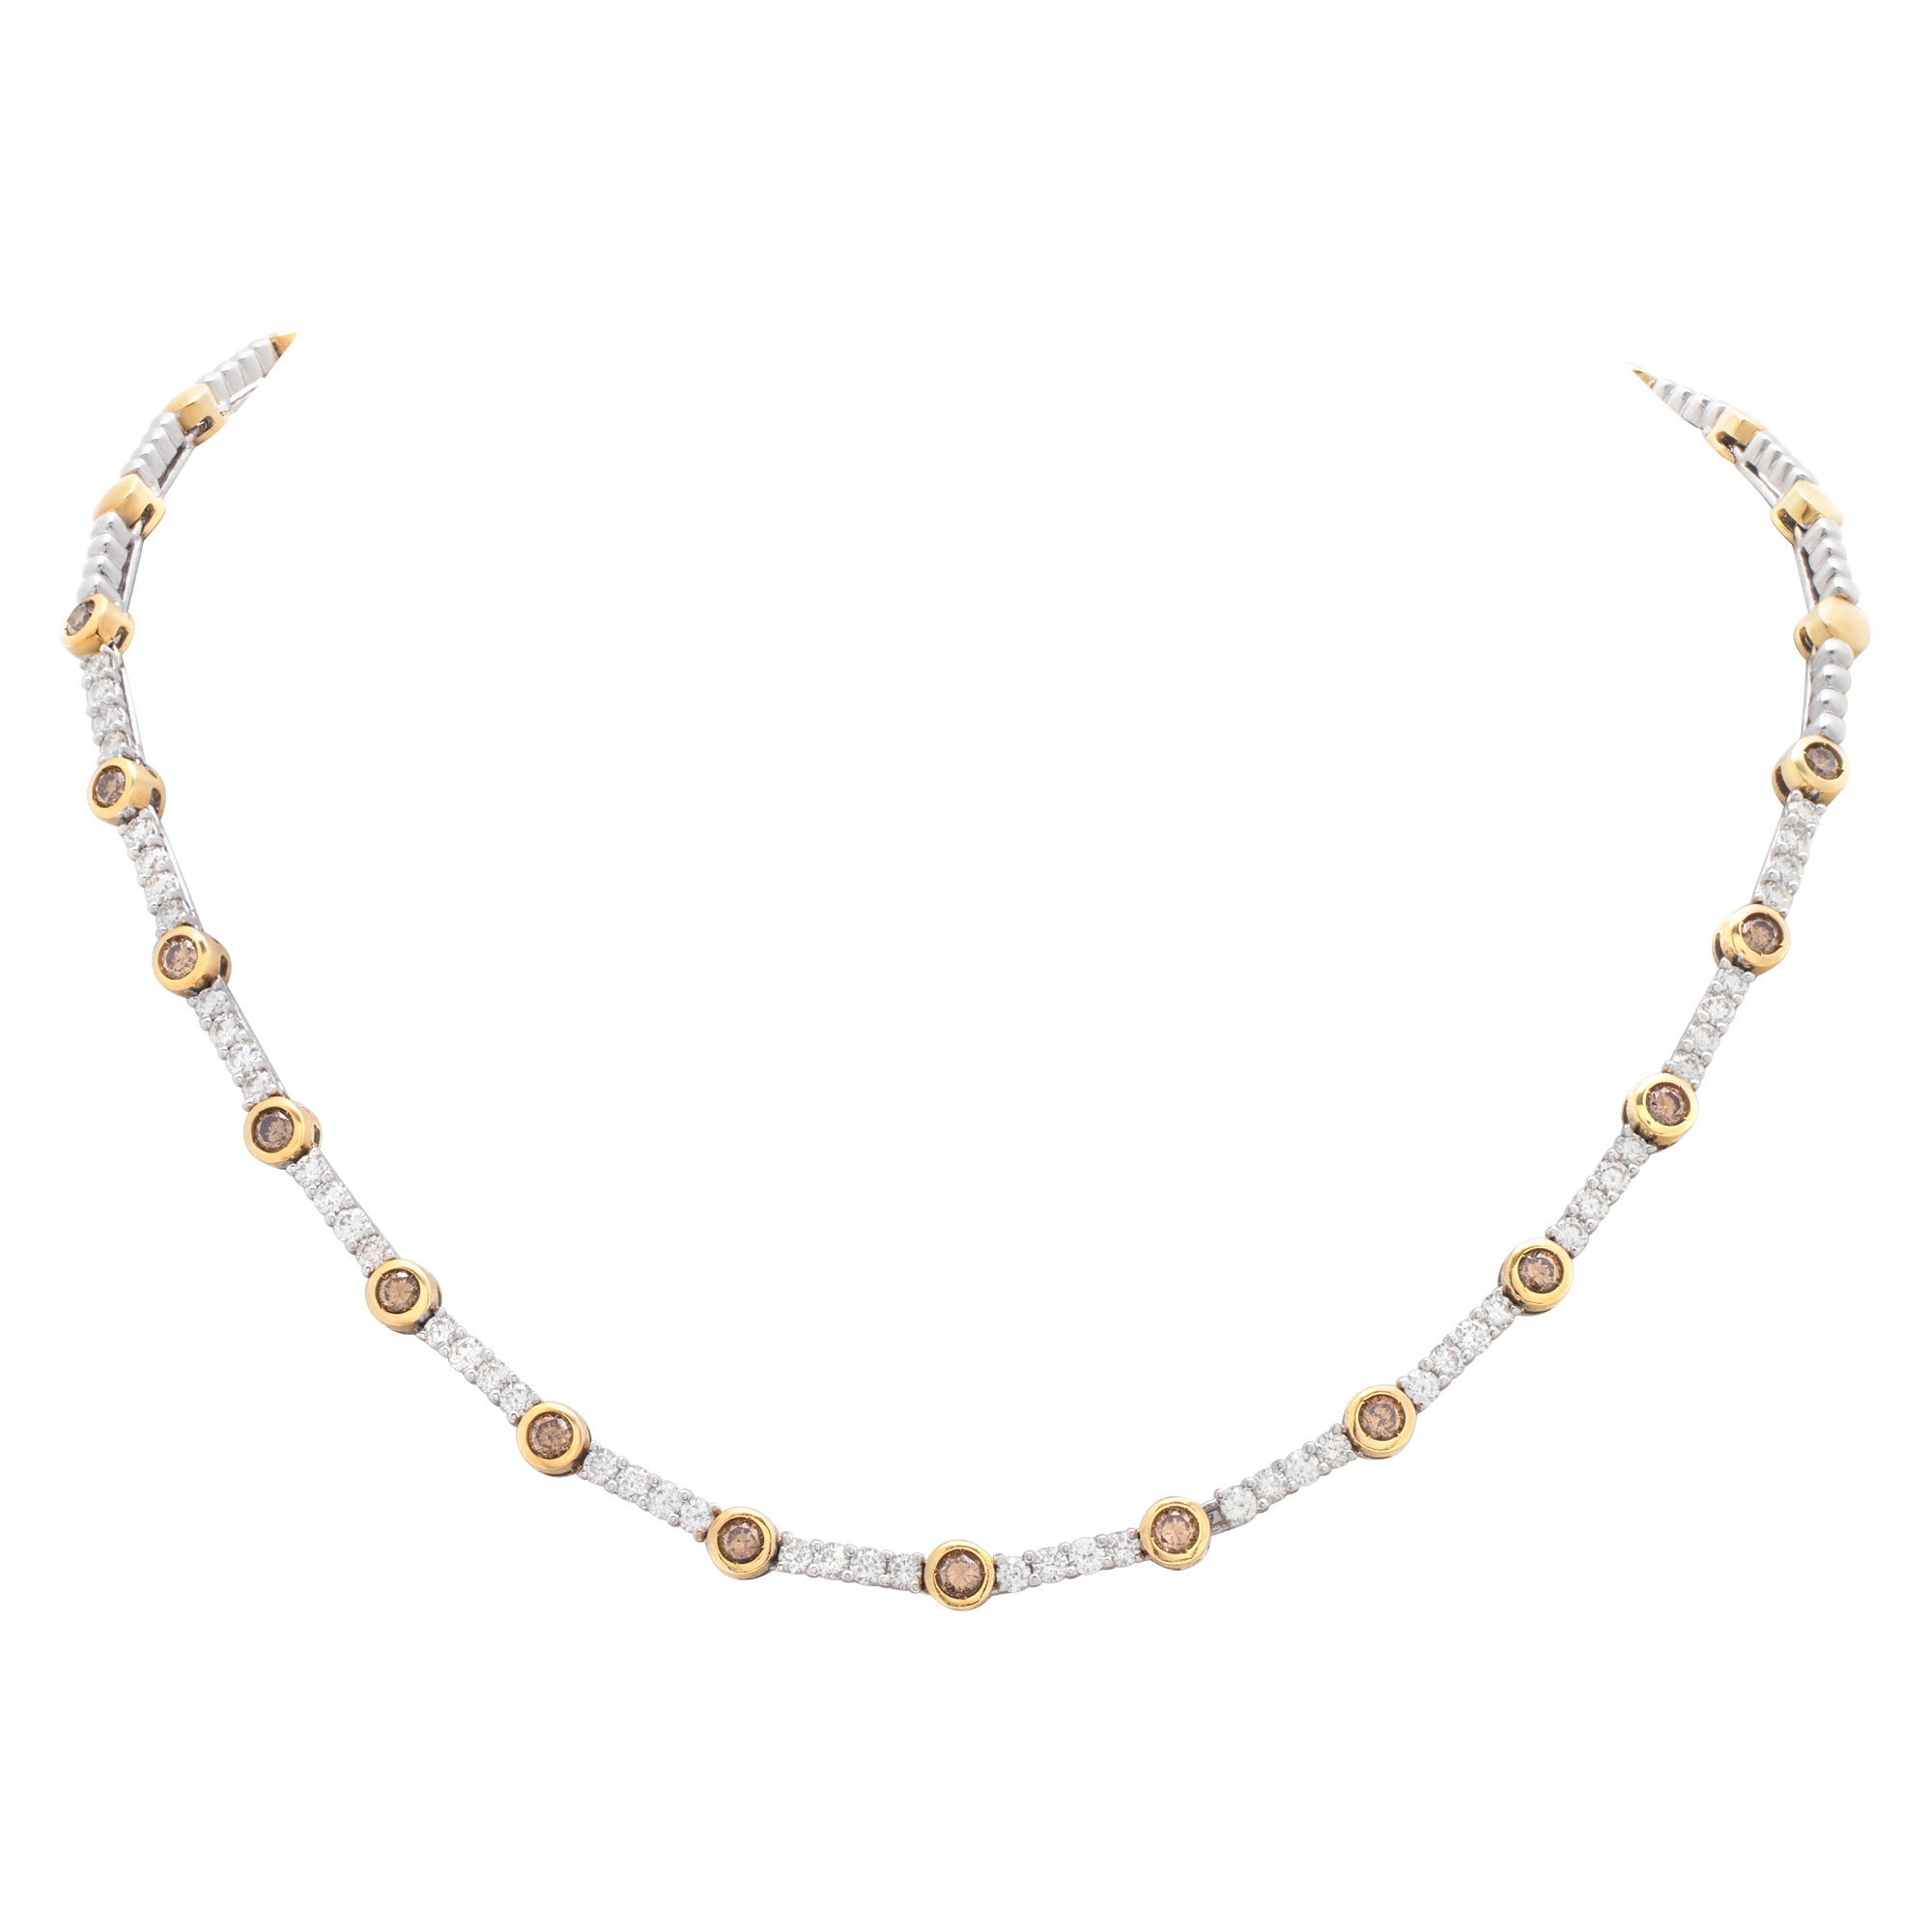 Stunning 18k white and yellow gold necklace with white and yellow diamonds